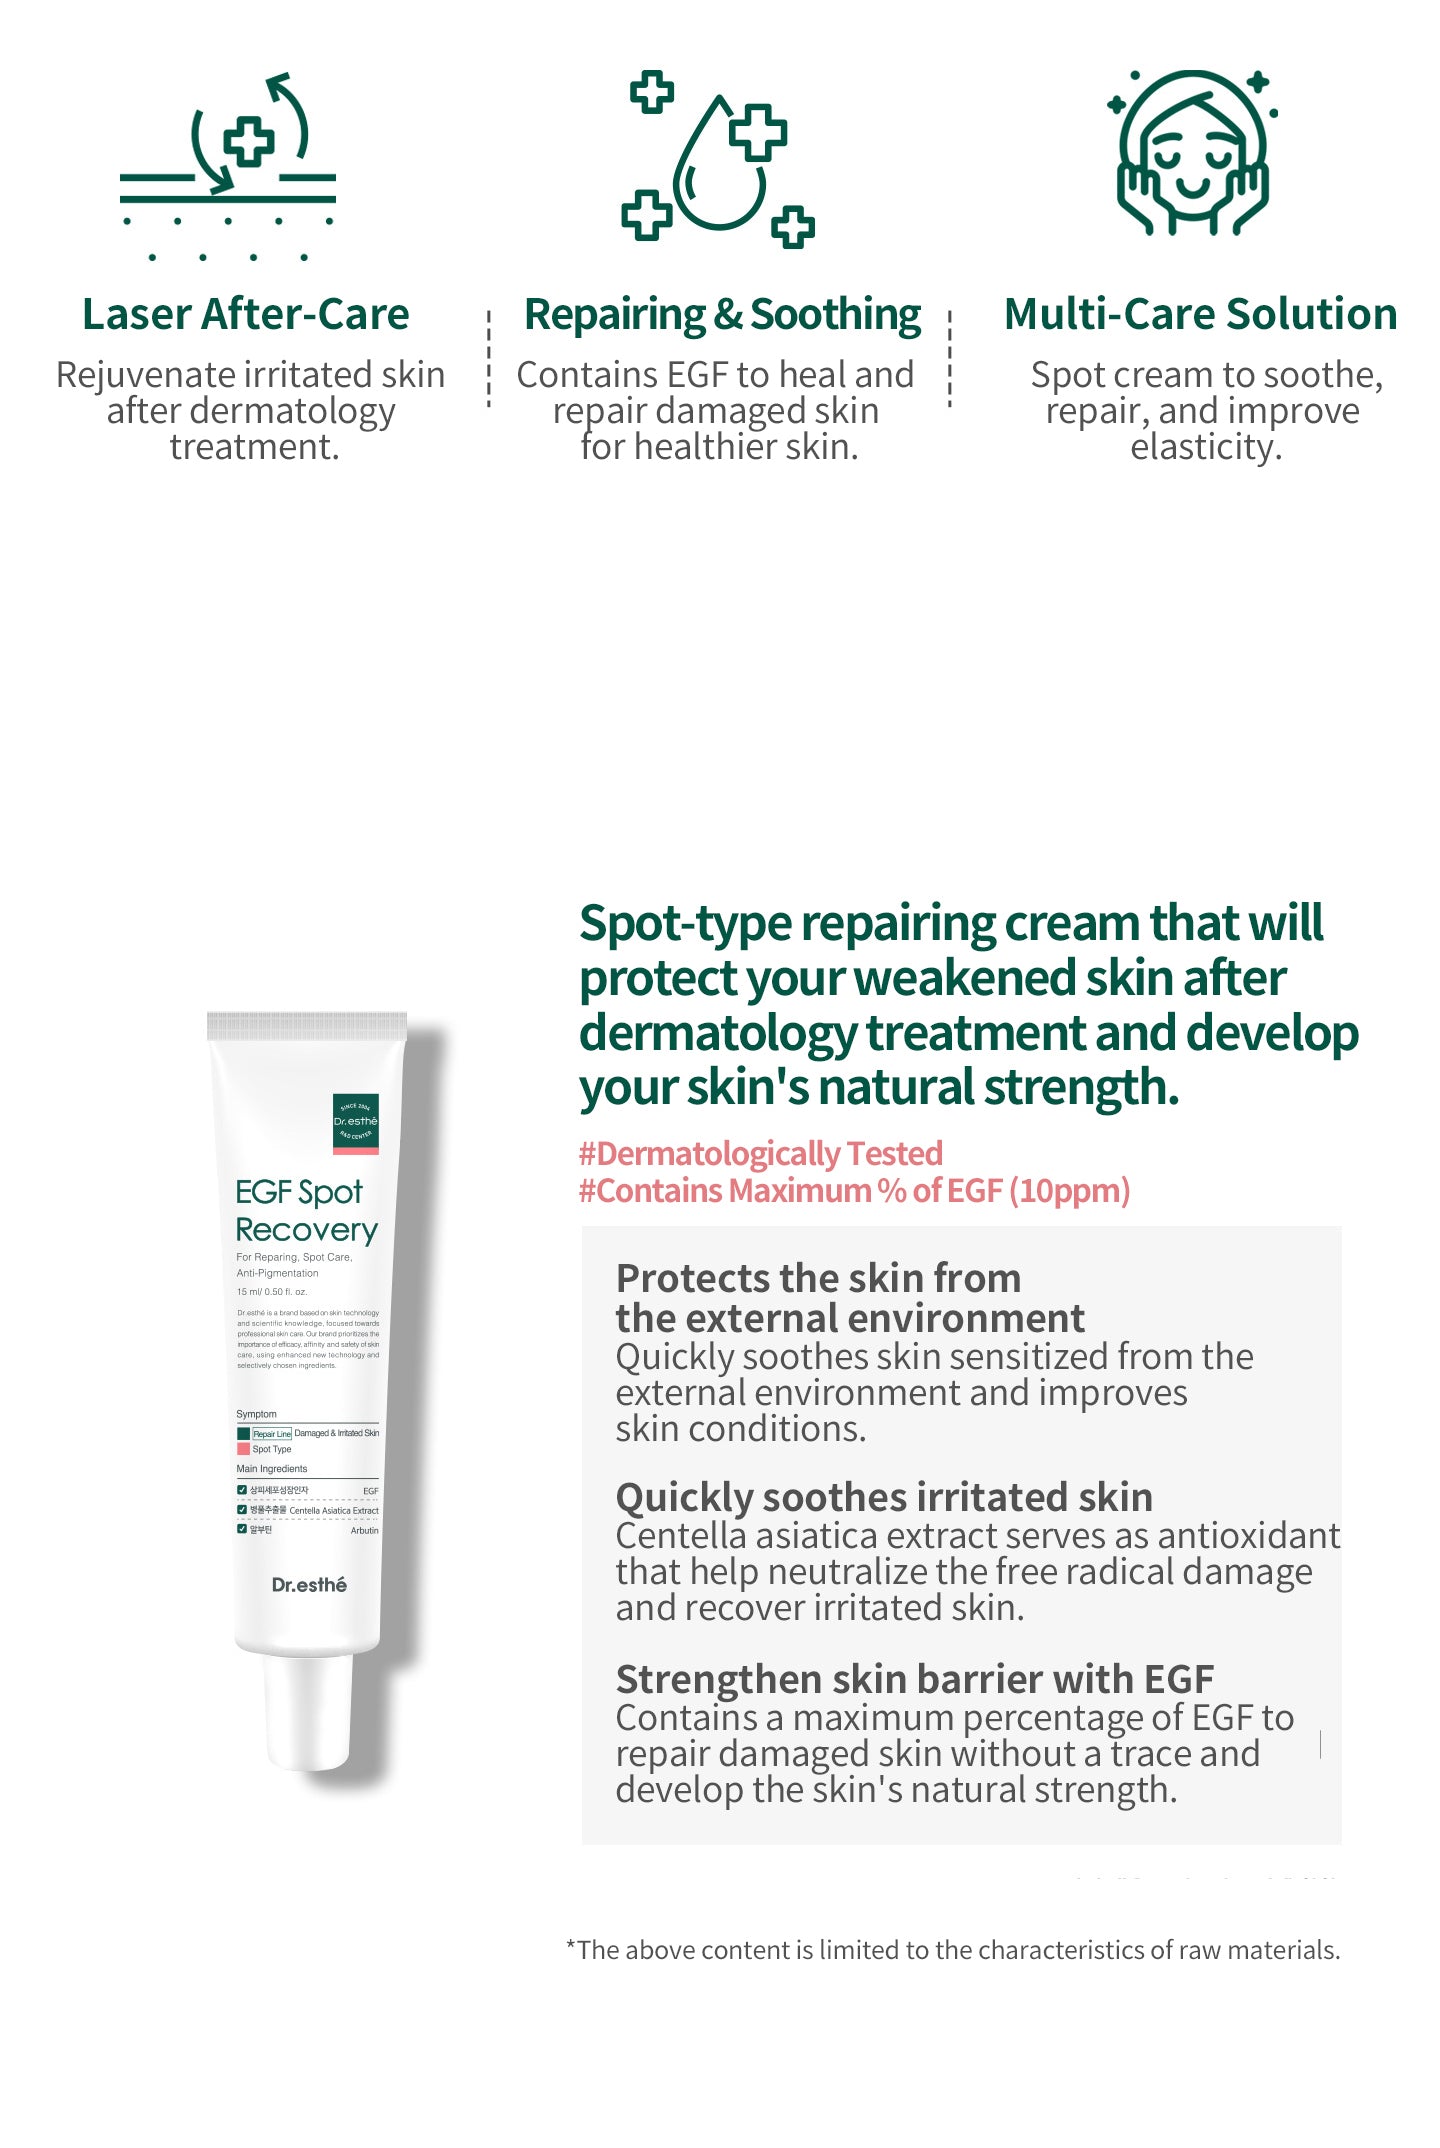 Laser after-care, repairing & soothing, multi-care solution, spot-type repairing cream that will protect your weakened skin after dermatology treatment and develop your skin's natural strength. contains maximum % of EGF 10ppm. Protects the skin from 